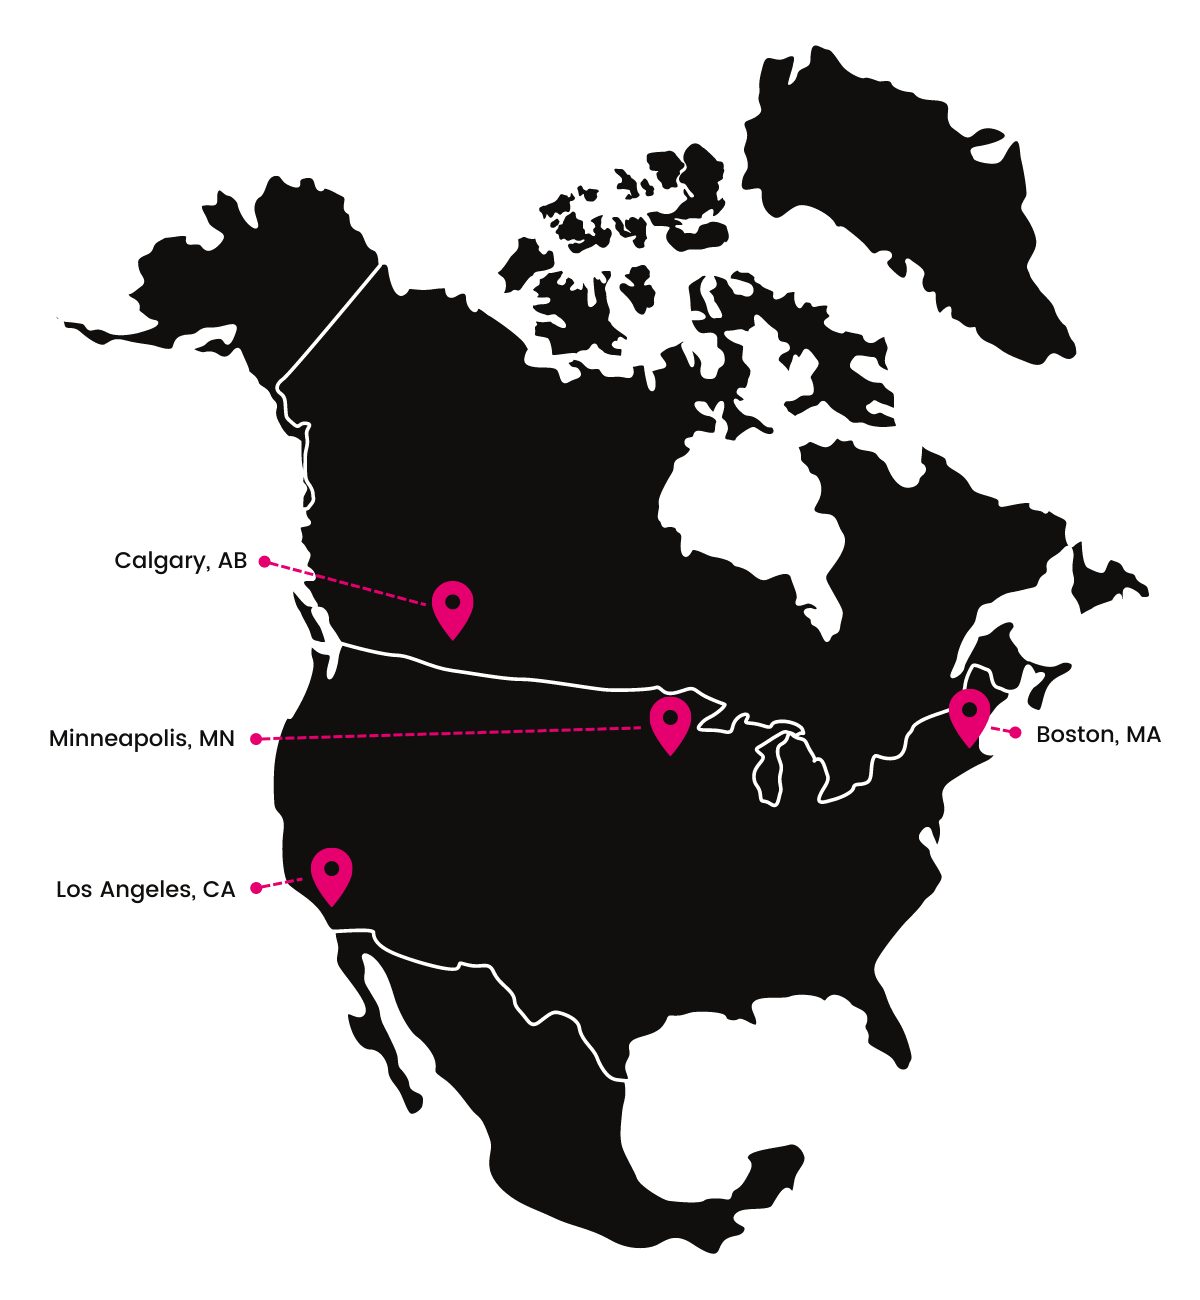 North American map for 3Play Media and 3Play Media Canada offices: Boston, Minneapolis, Los Angeles, Calgary (Canada)